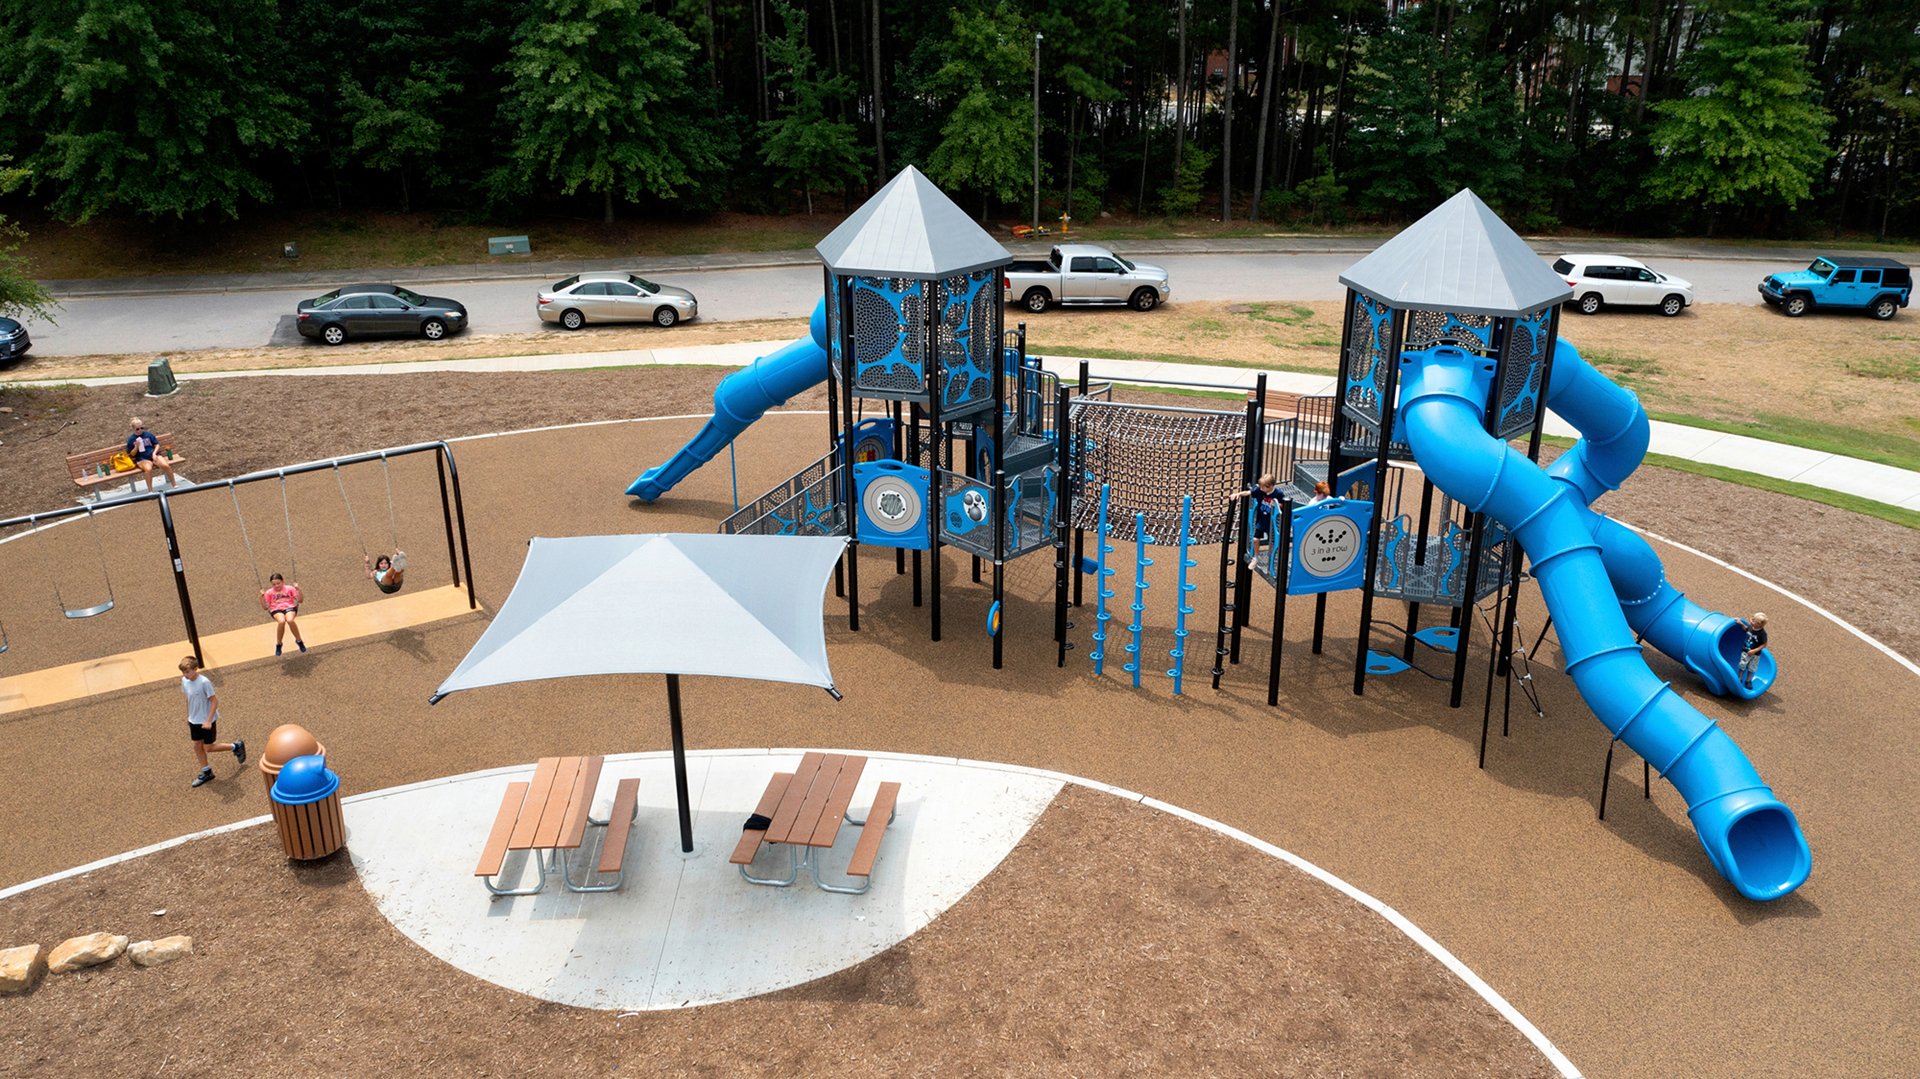  Photography of the GameTime Playground and Challenge Course at Barnwell Road Park in Raleigh, NC.Charlotte photographer - Patrick SchneiderPhoto.com 